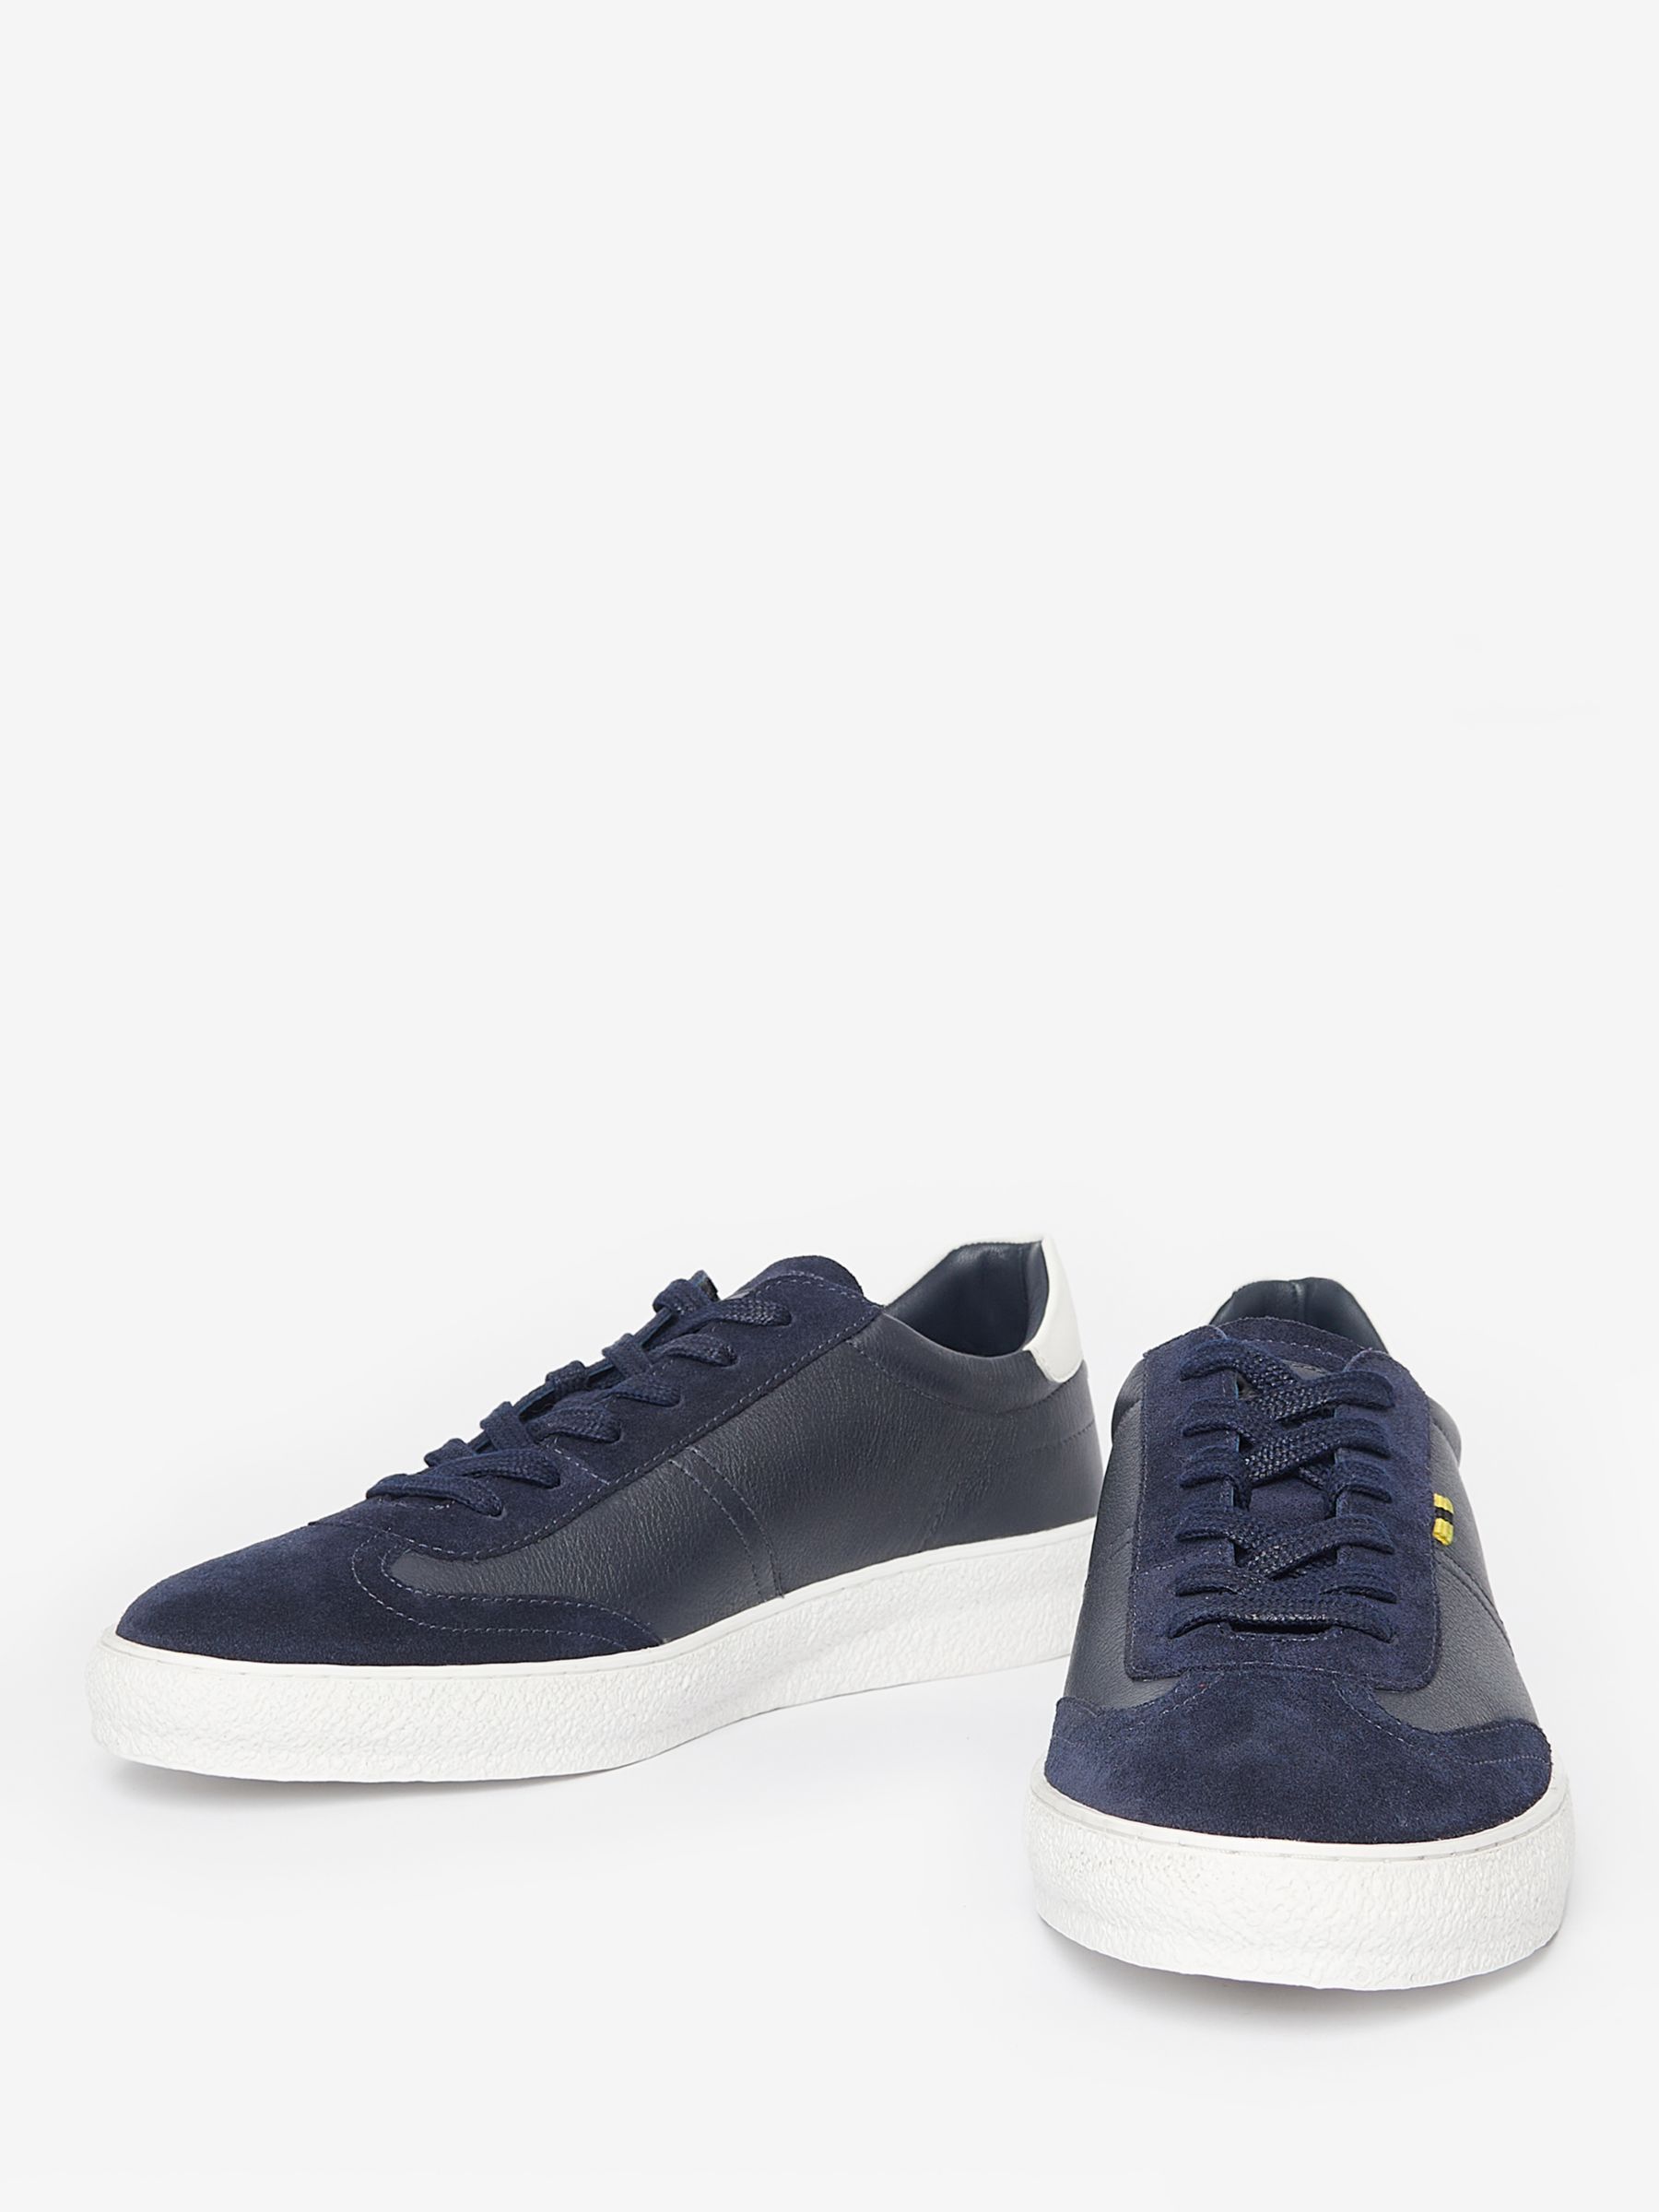 Barbour International Felix Leather Trainers, Navy, 7